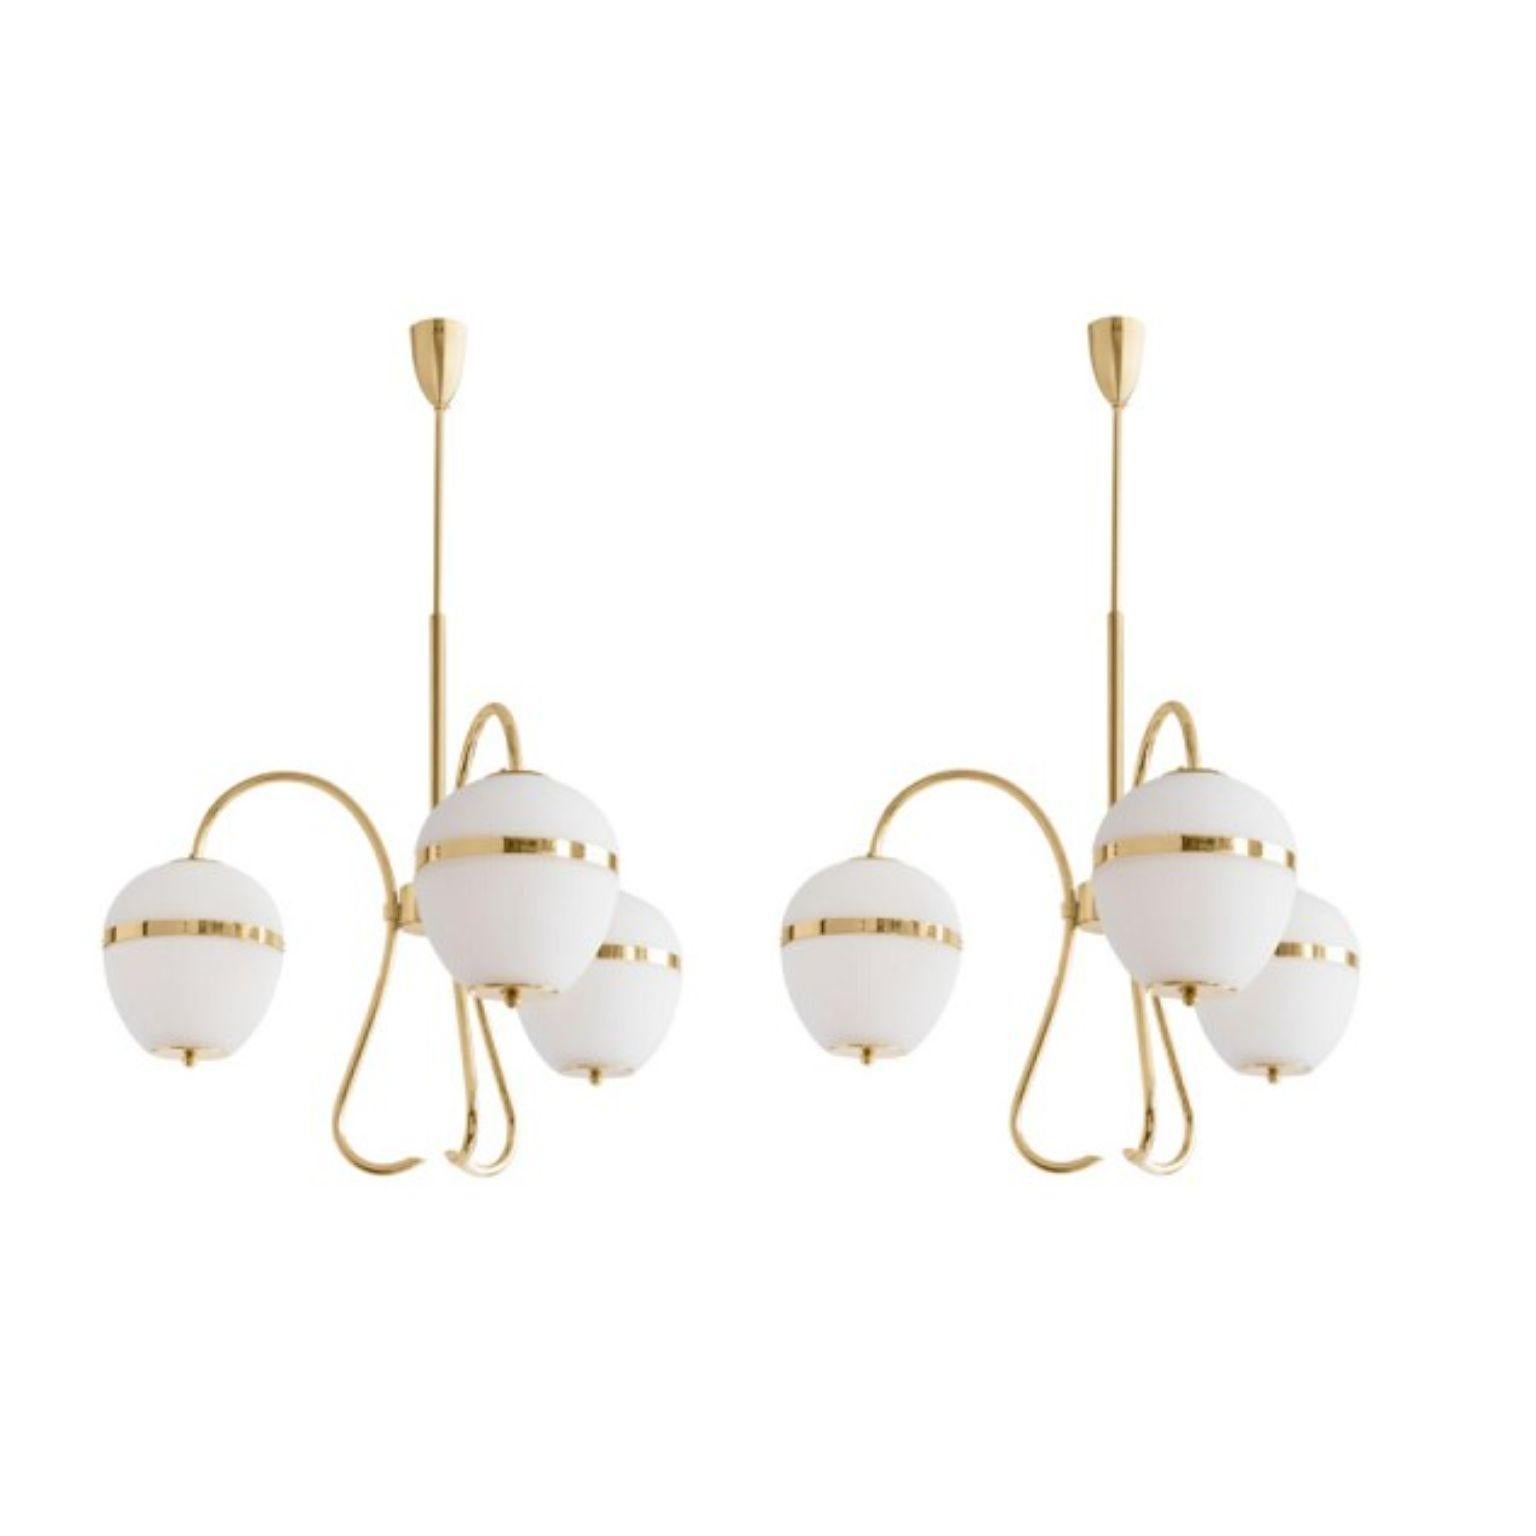 Triple chandelier China 02 by Magic Circus Editions
Dimensions: H 120 x W 80.3 x D 25 cm
Materials: Brass, mouth blown glass sculpted with a diamond saw
Colour: soft rose

Available finishes: Brass, nickel
Available colours: enamel soft white,